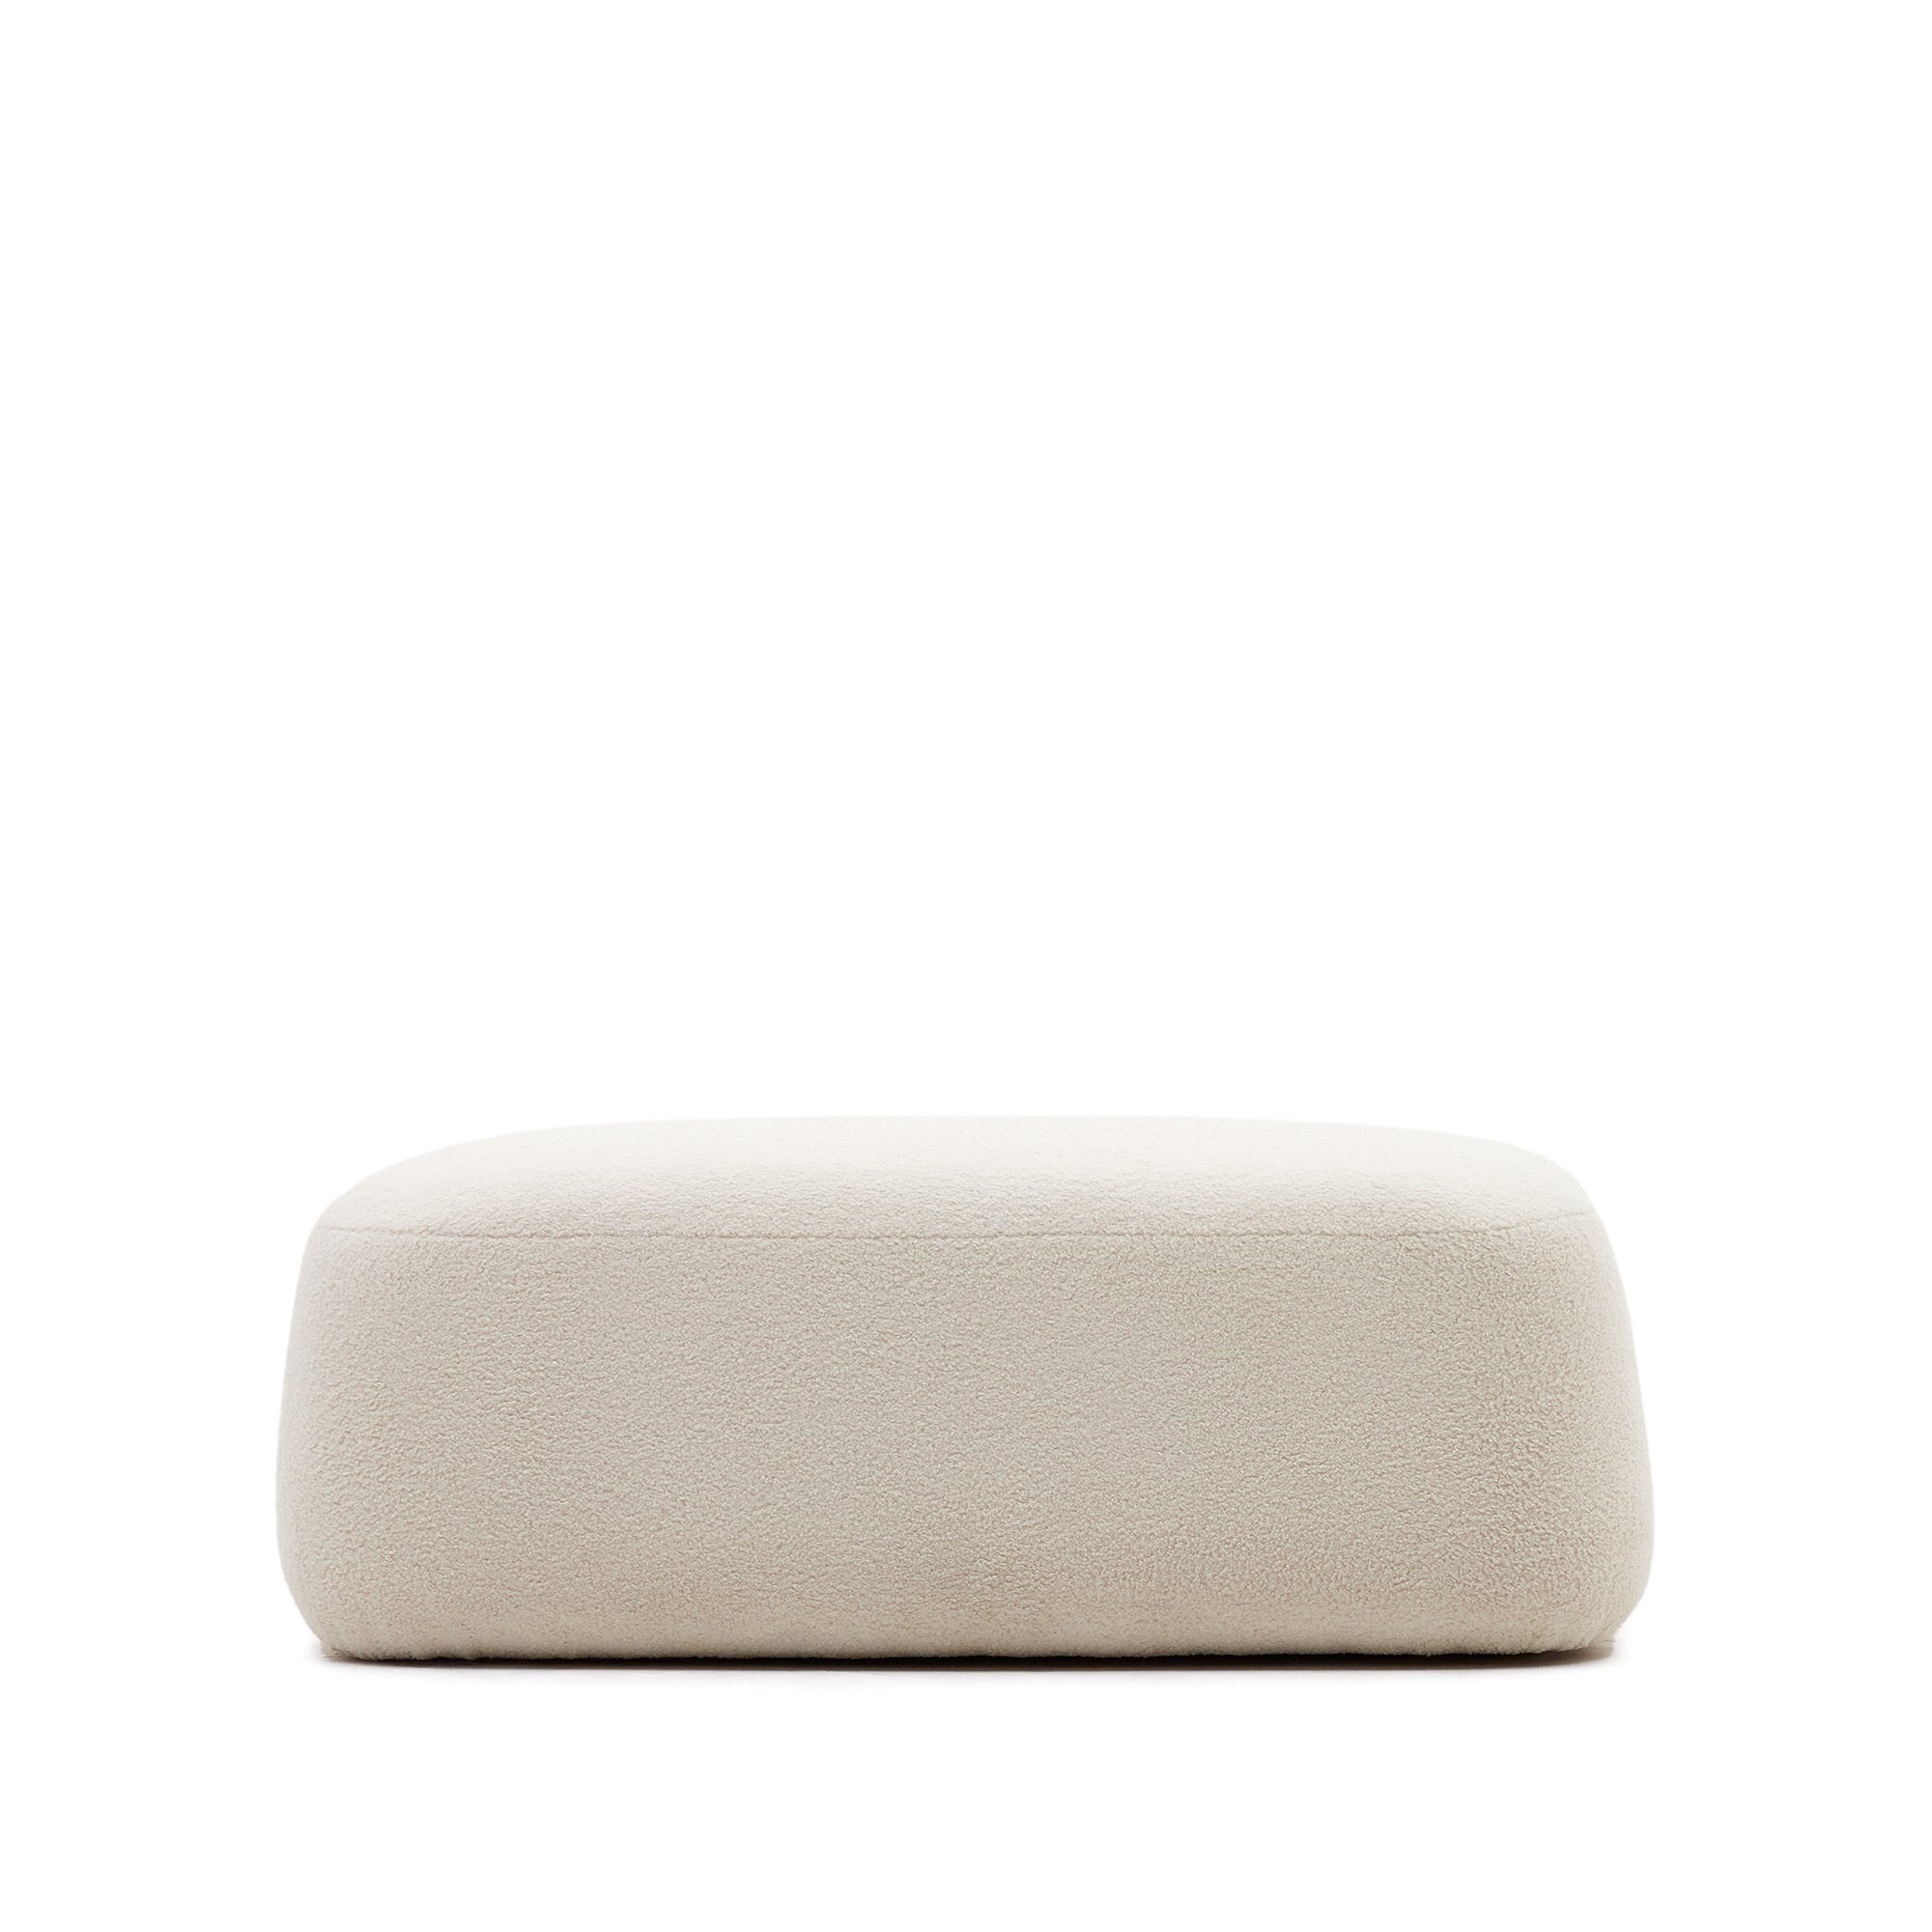 Martina off-white shearling footrest 123 x 85 cm